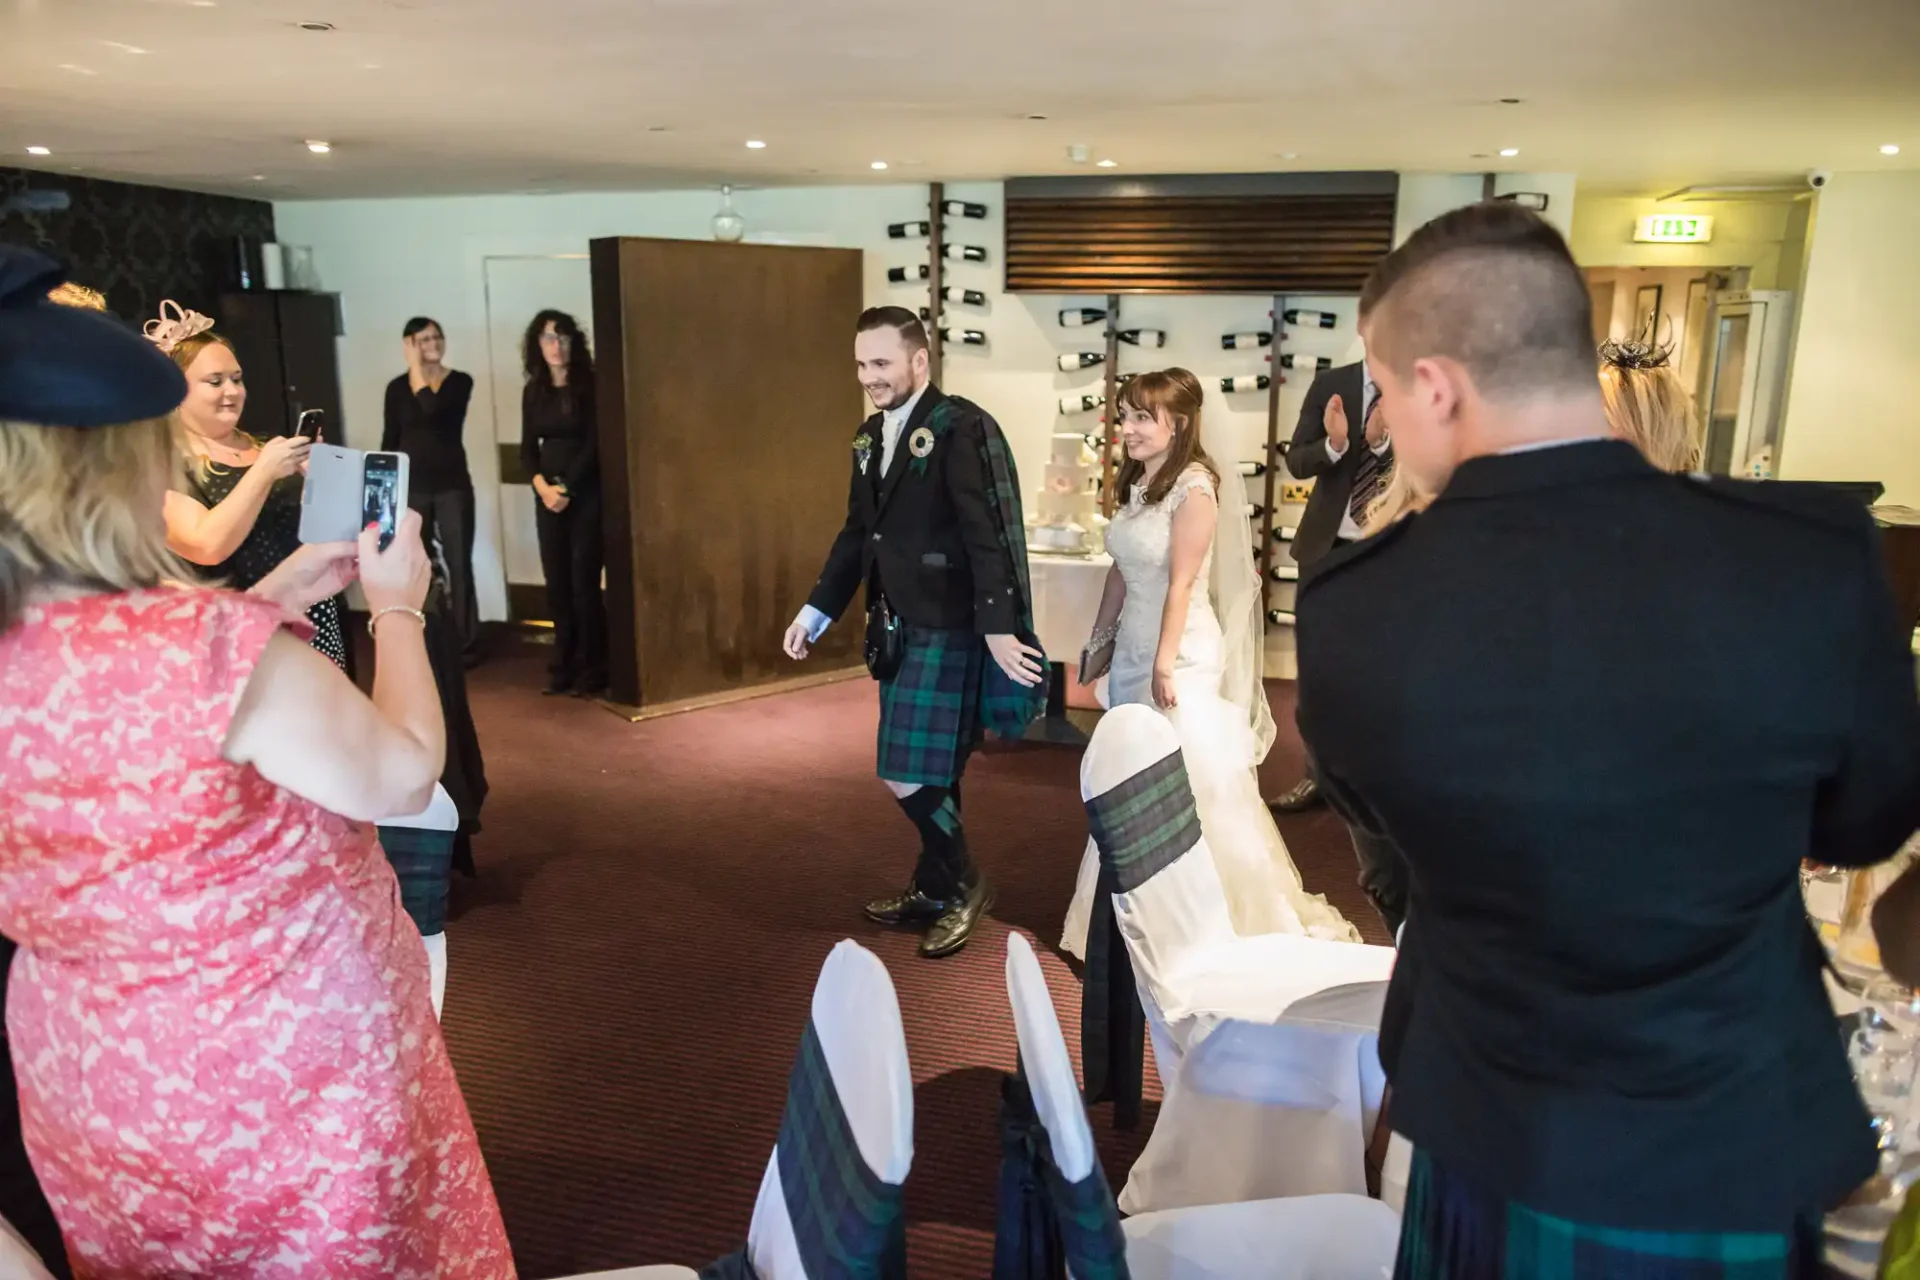 A bride and groom walking hand in hand through a room of guests, with the groom wearing a traditional kilt.